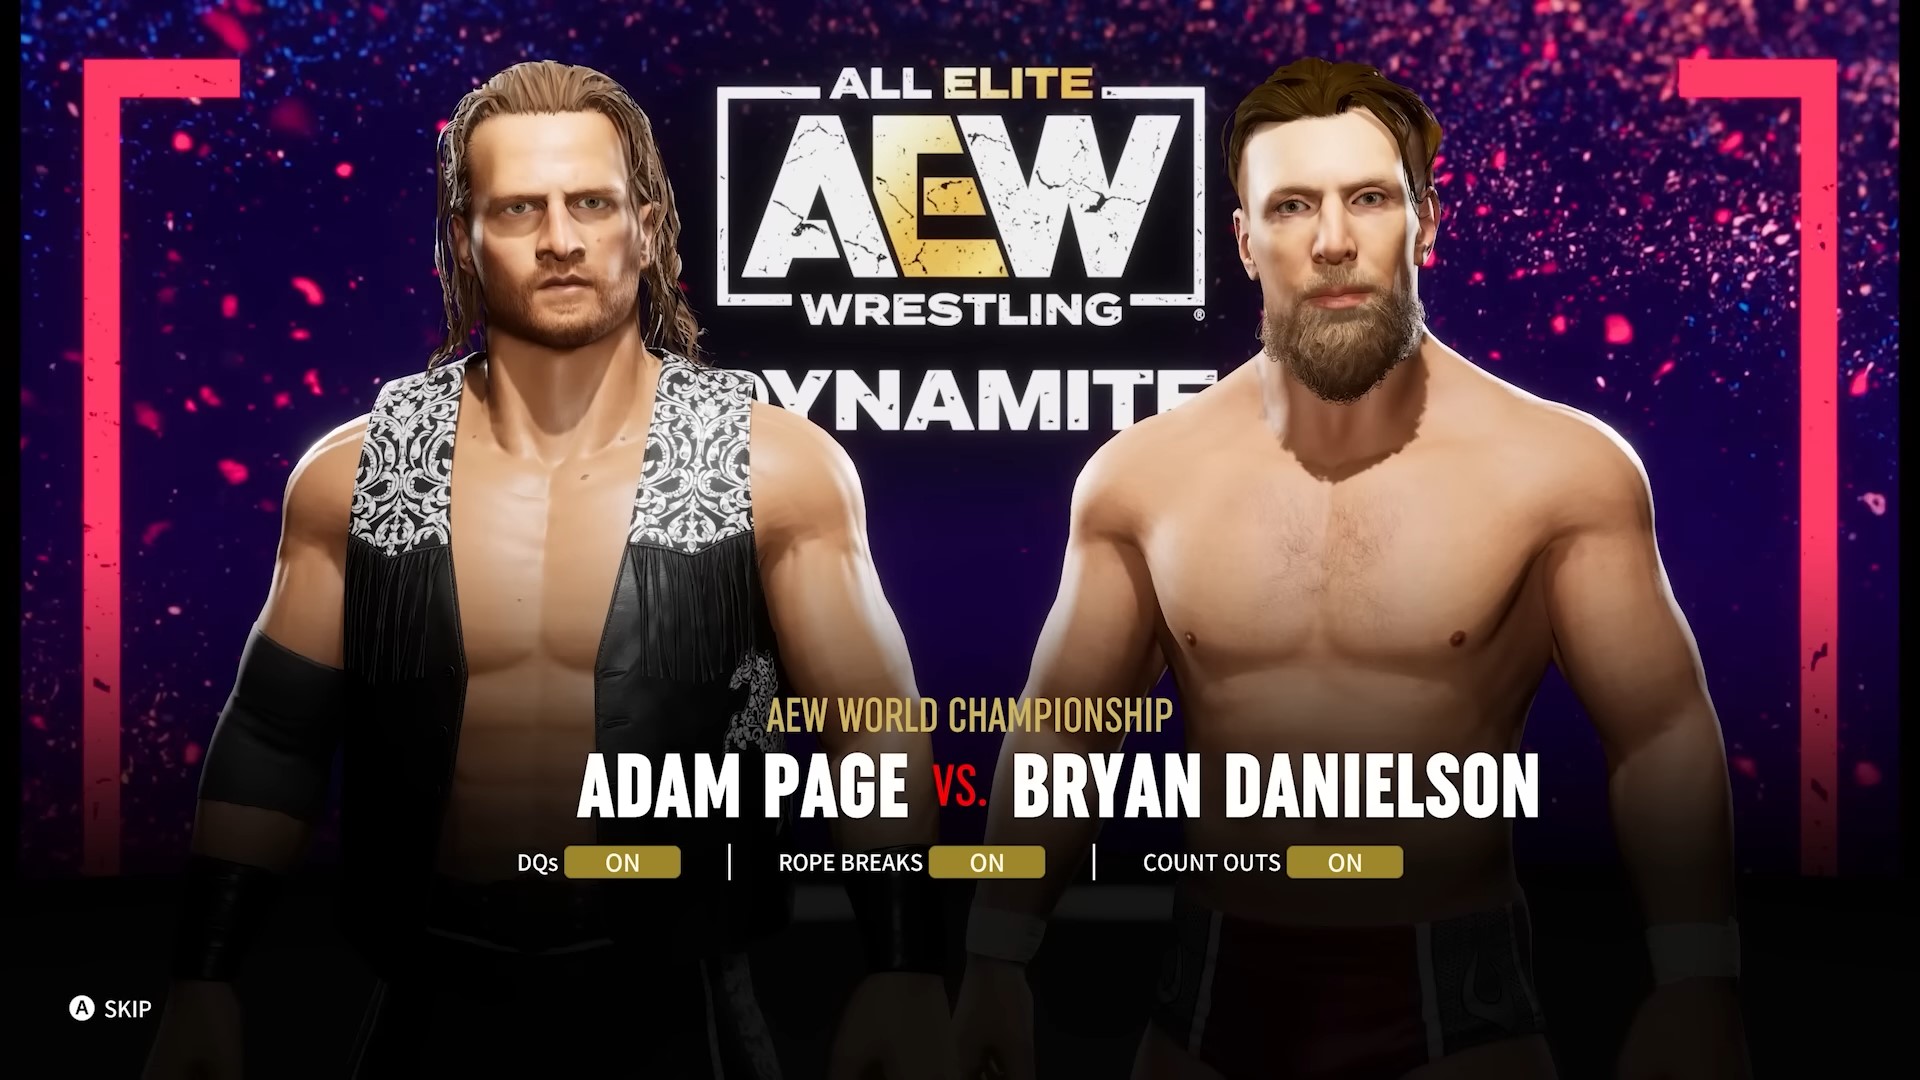 But Release A New To Due Ratings Issues Forever AEW: Fight Trailer Avoids Gameplay Gets A Date